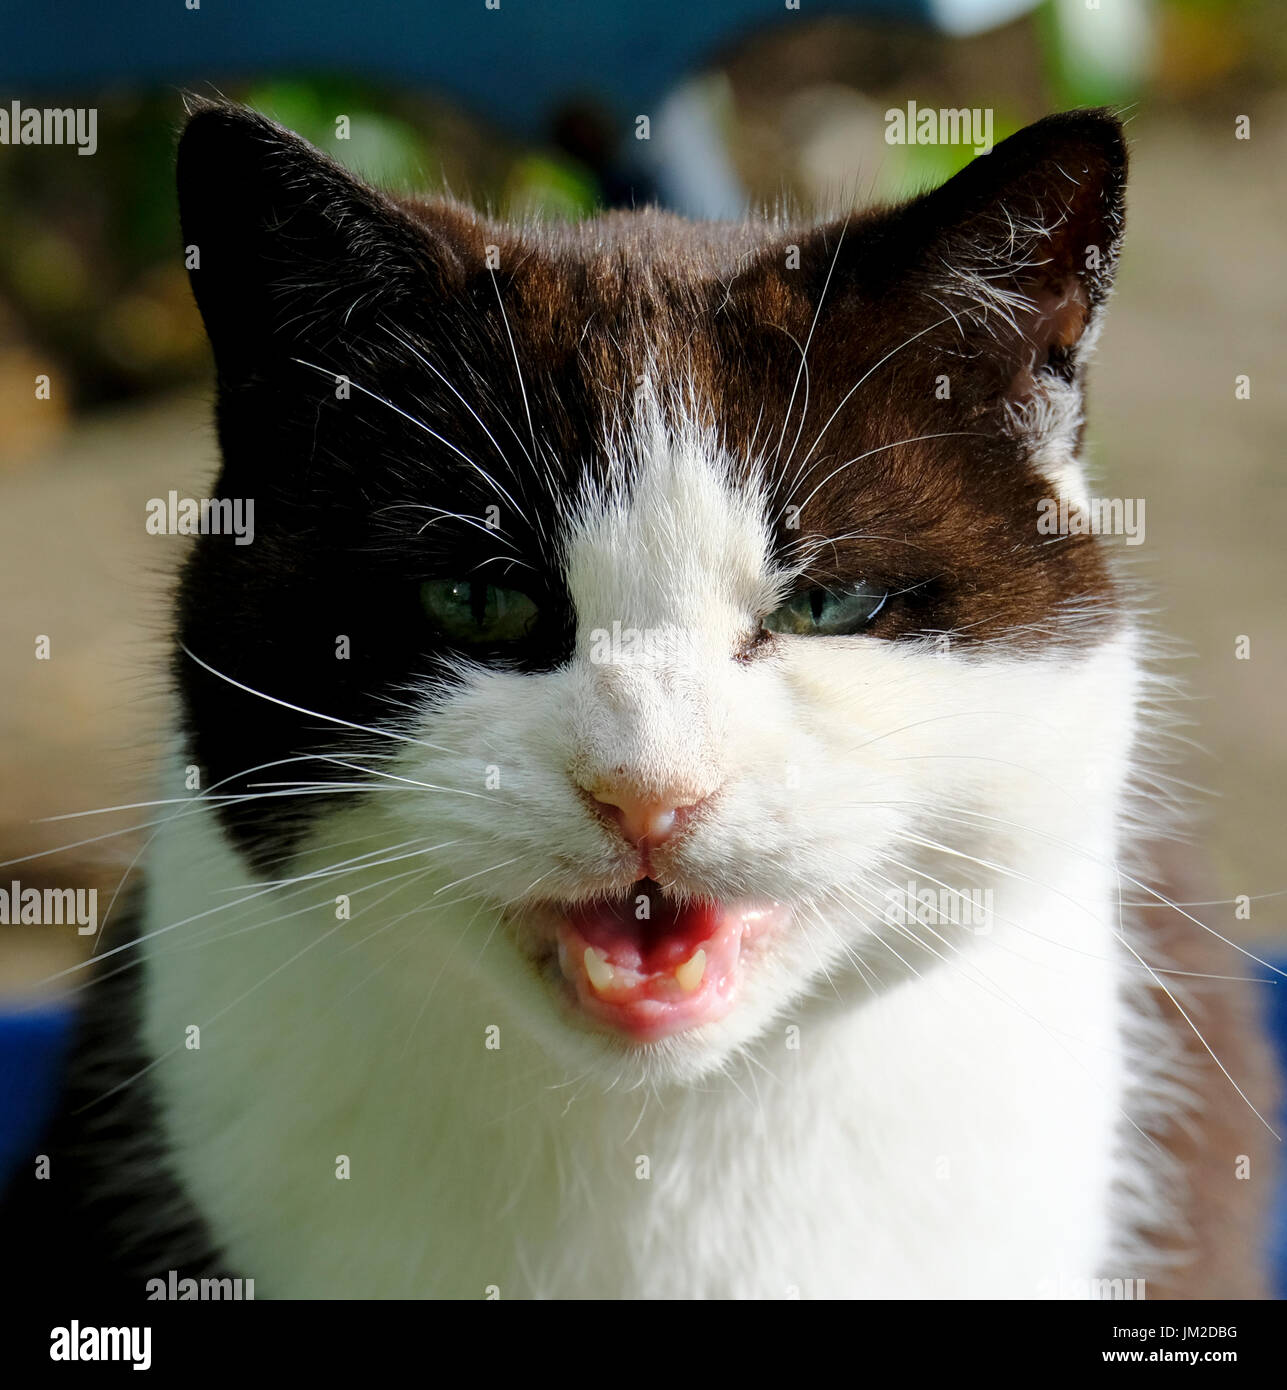 Poppy, a black and white domestic cat (Felis catus) siting on patio chair and pulling faces Stock Photo